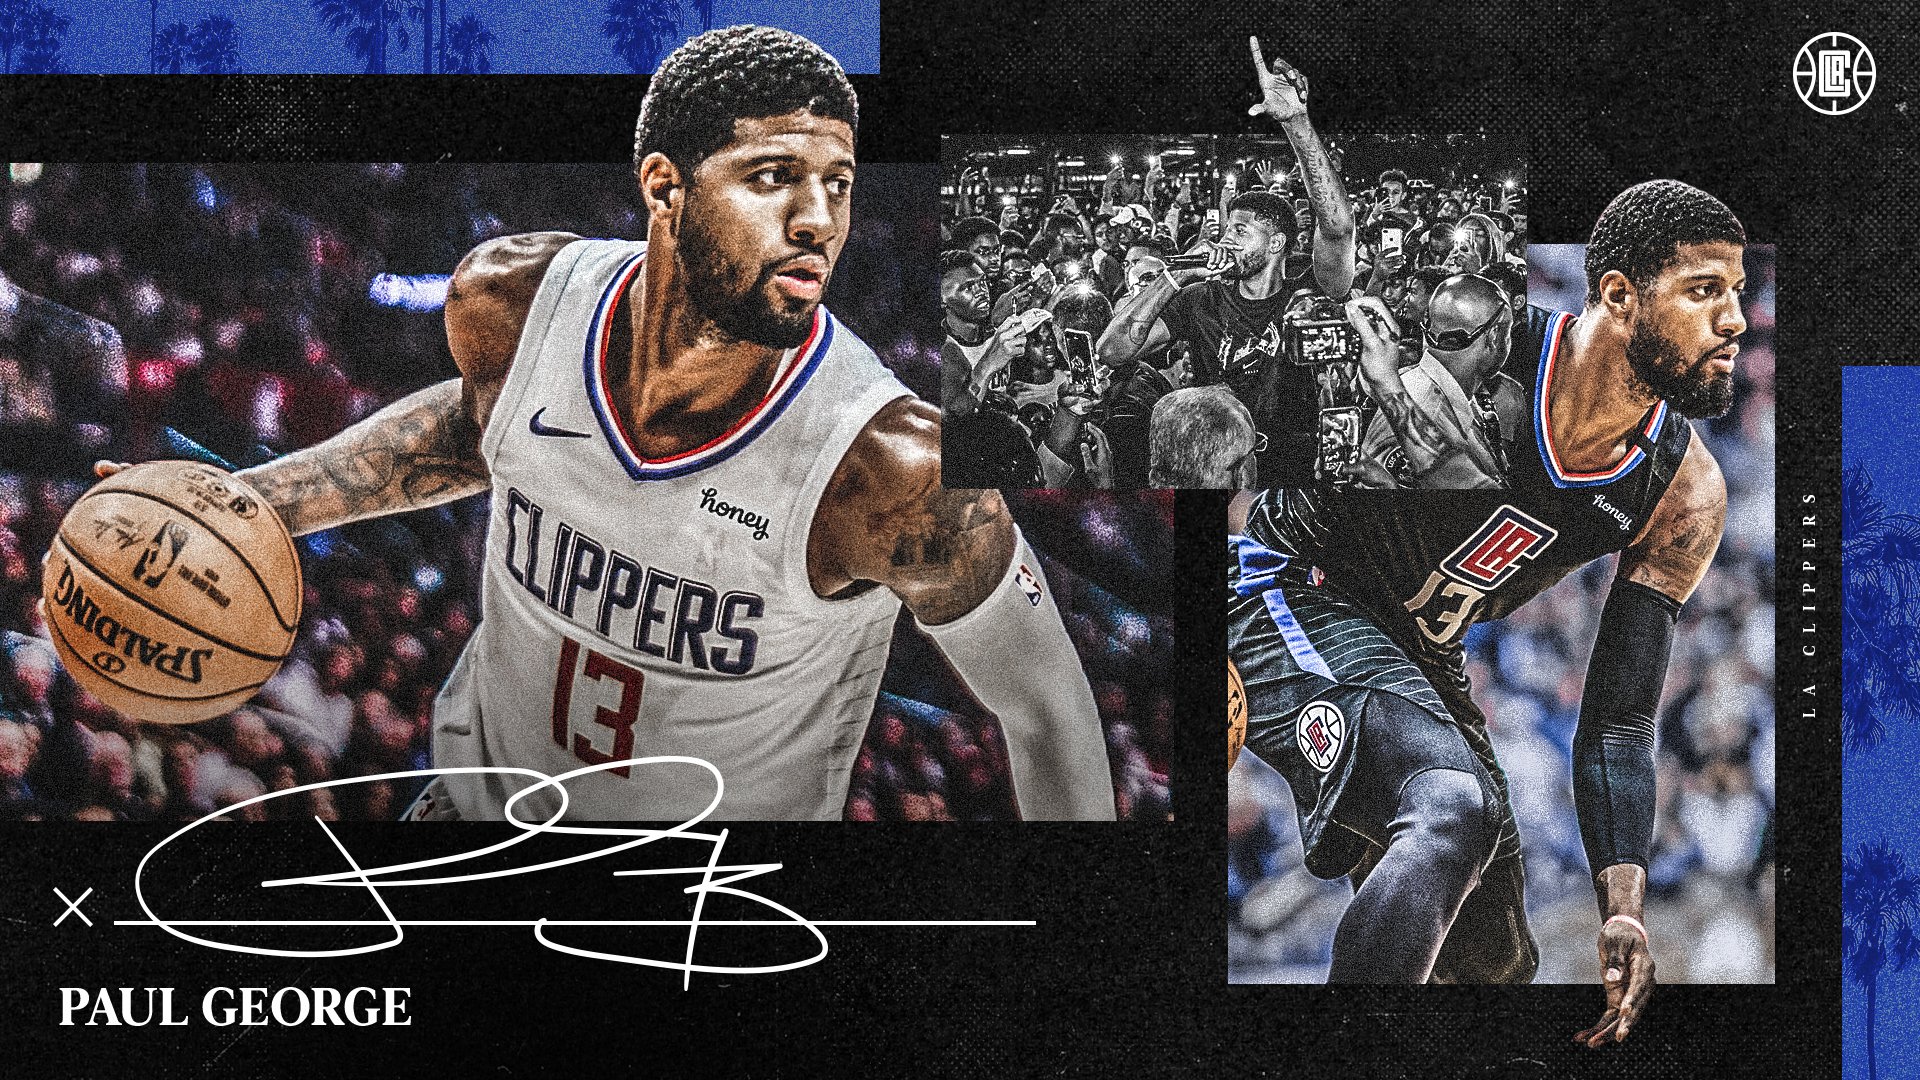 NBA: Clippers and Paul George agrees 4